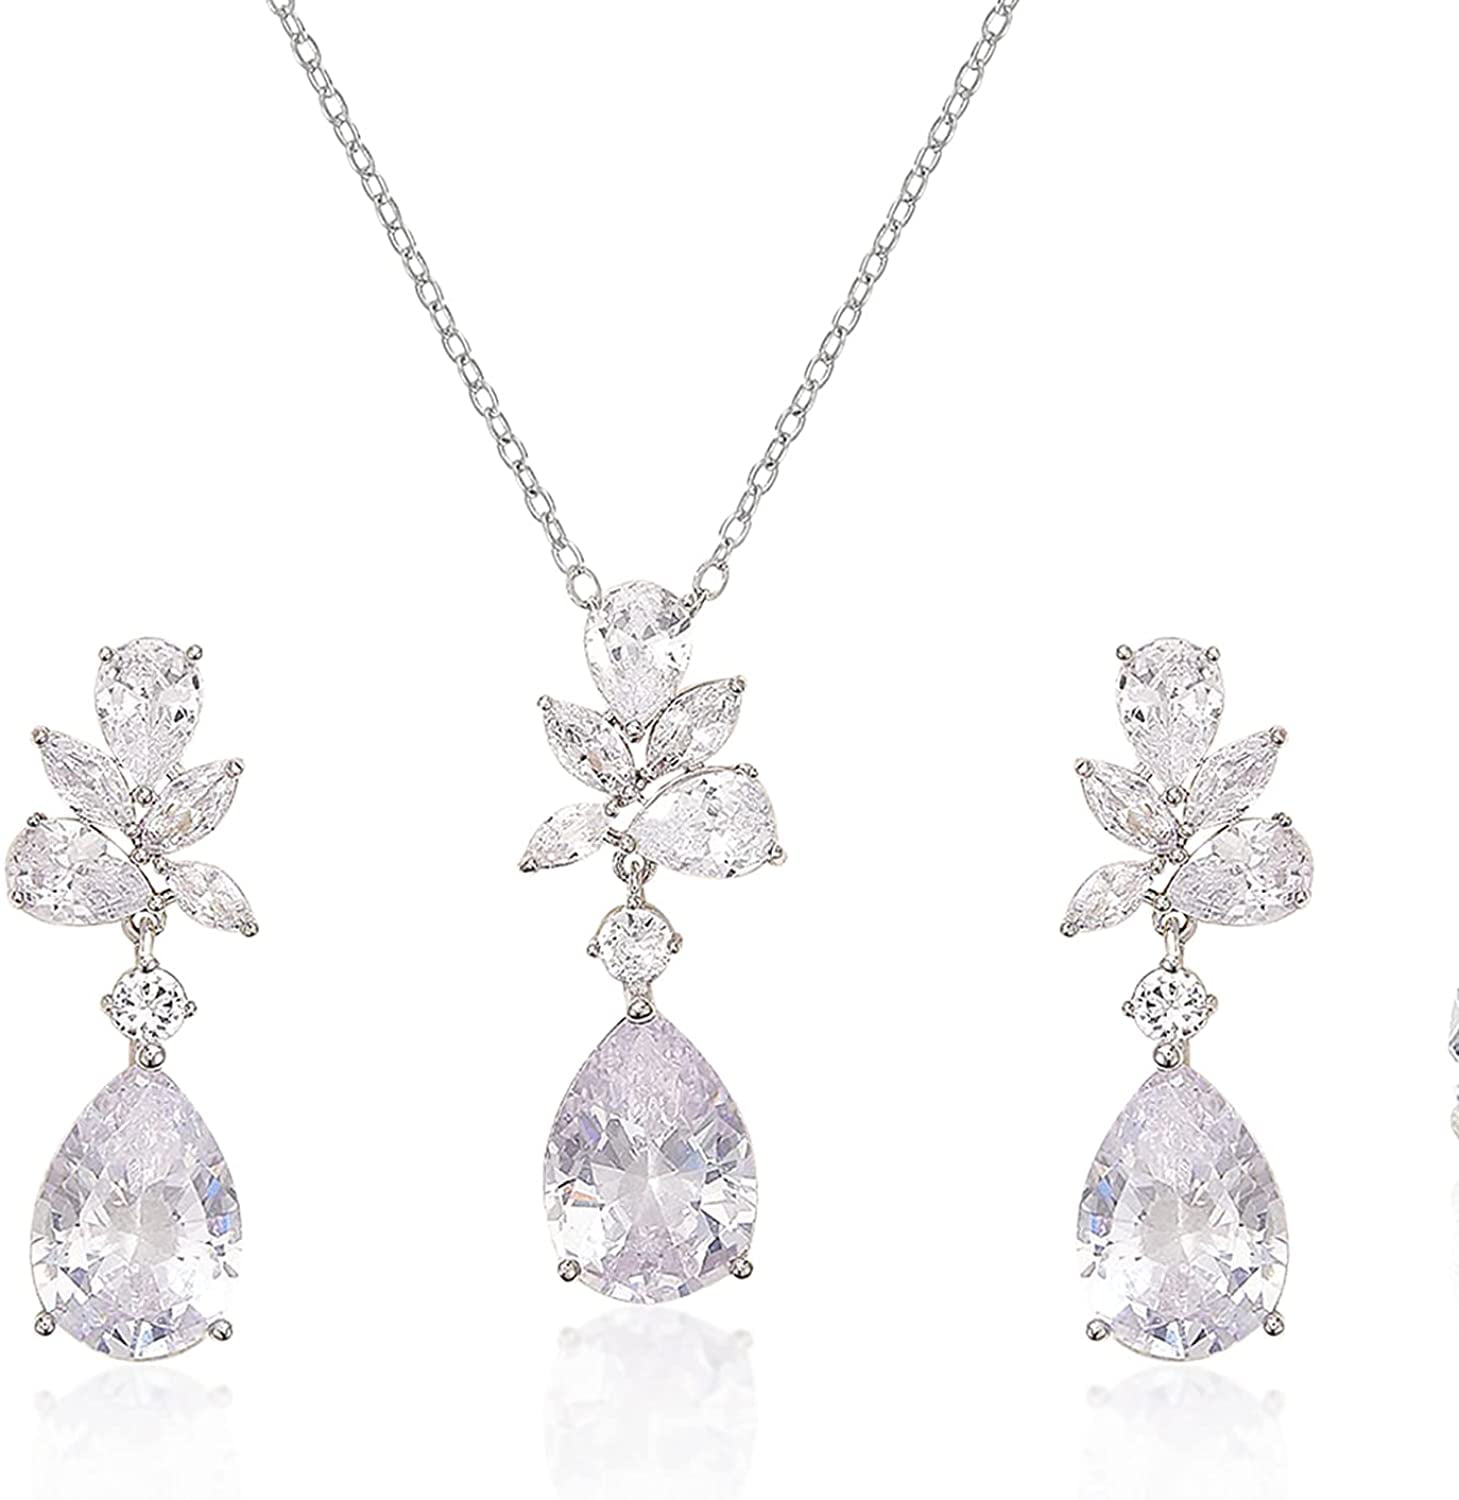 SWEETV Marquise Wedding Jewelry Set for Bride Bridesmaids Cubic Zirconia Crystal Necklace Earrings Set for Women Bridal Jewelry Set for Wedding 